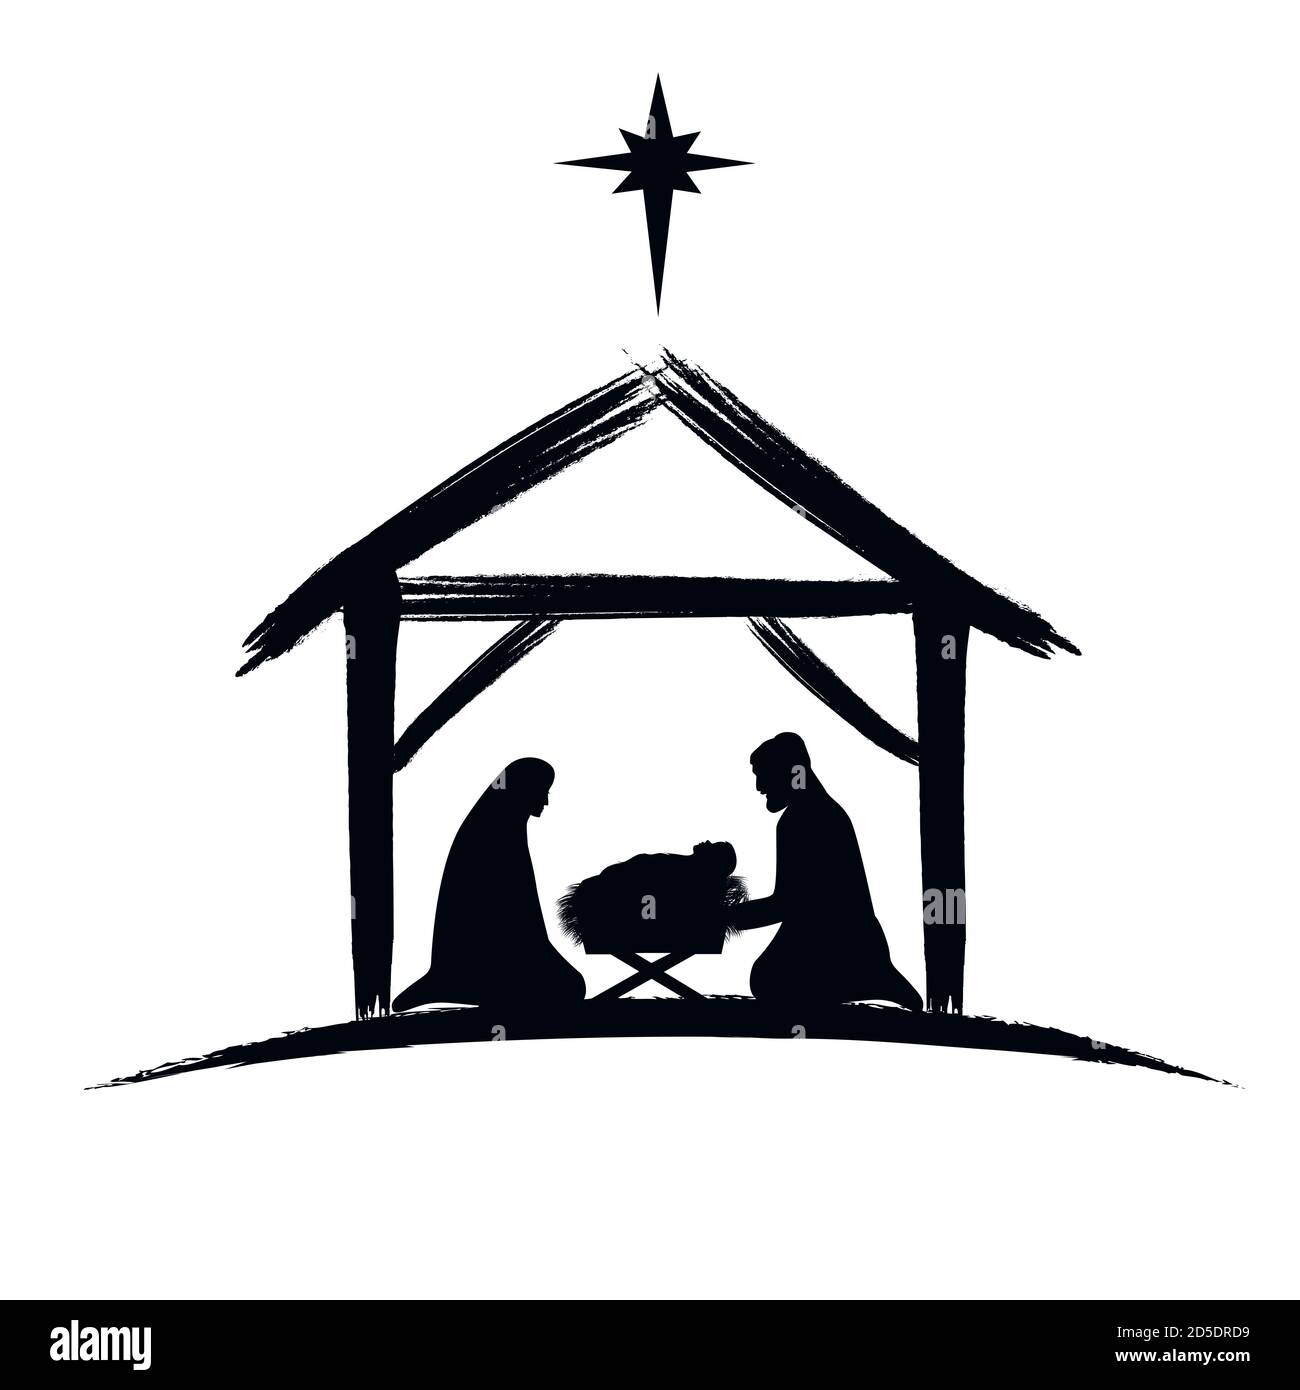 Nativity scene silhouette banner design with manger cradle for baby Jesus, holiday Holly Night. Vector illustration for Christmas cut file scrapbook Stock Vector